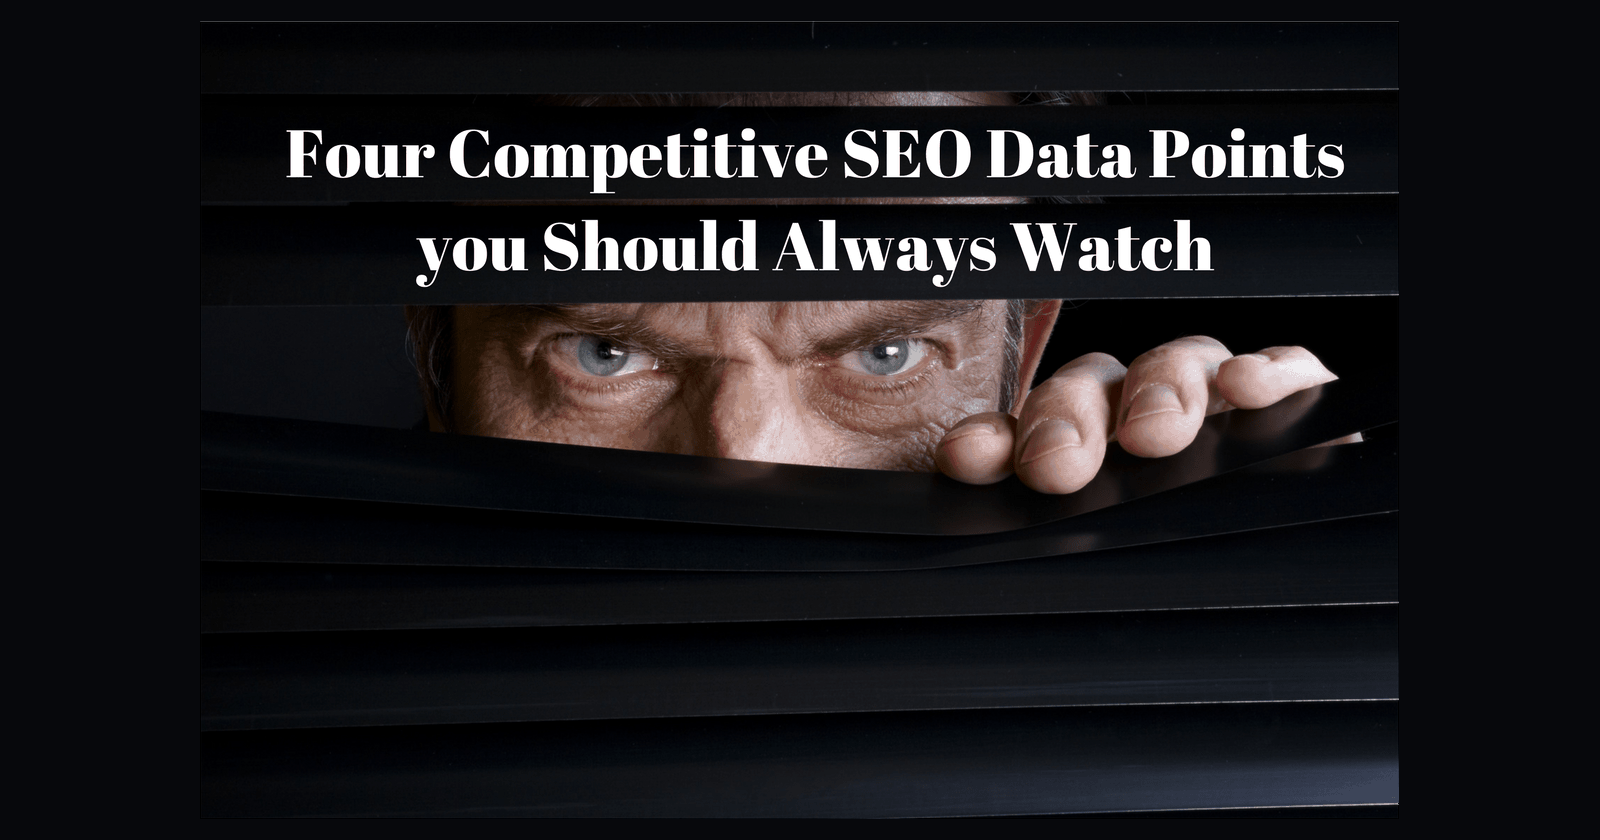 Competetive SEO Data points